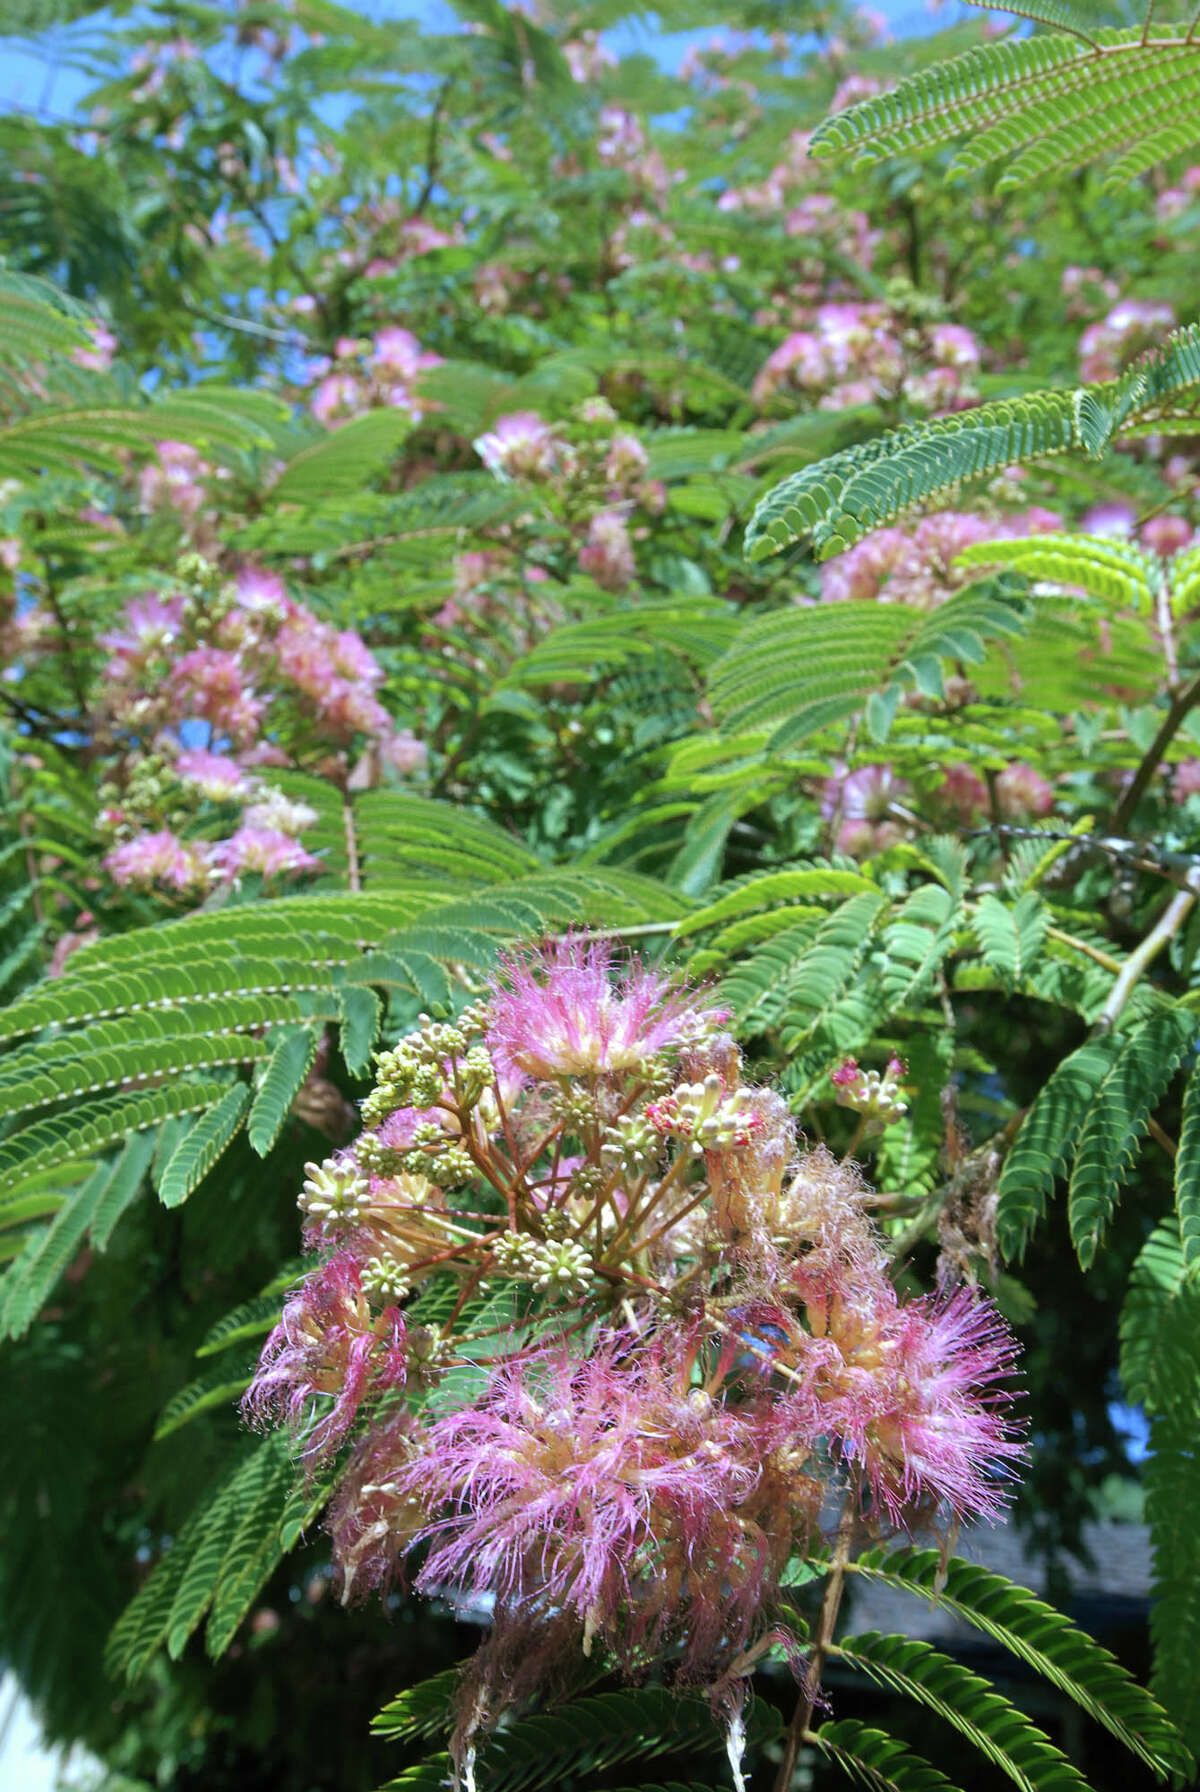 The pink, puffy blooms of the mimosa tree make it easily recognizable.﻿